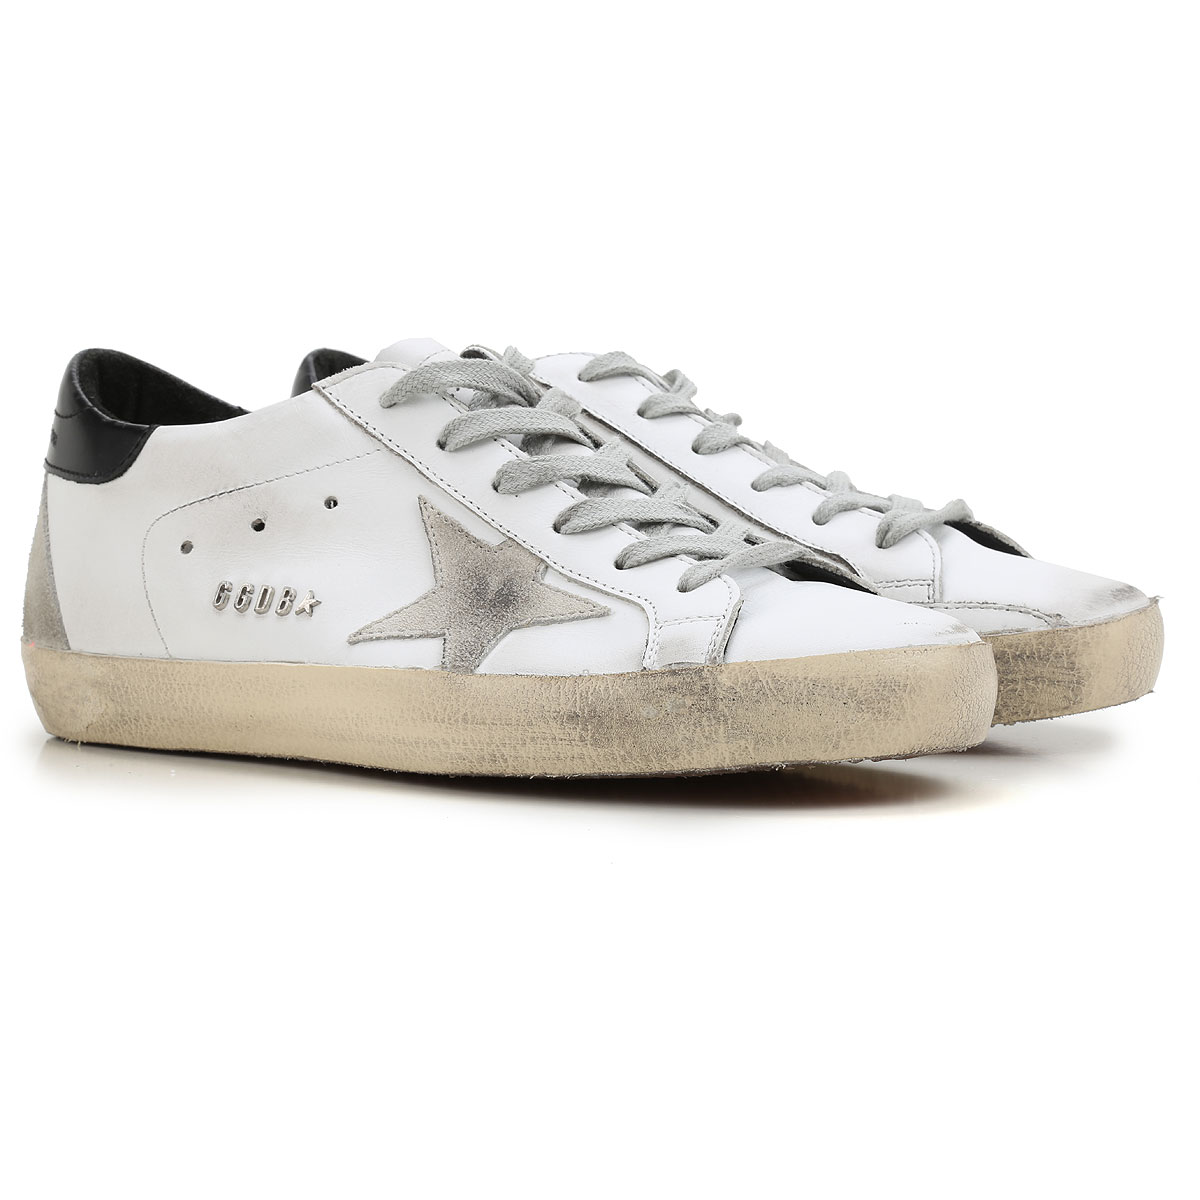 Womens Shoes Golden Goose, Style code: gc0ws590-w55-